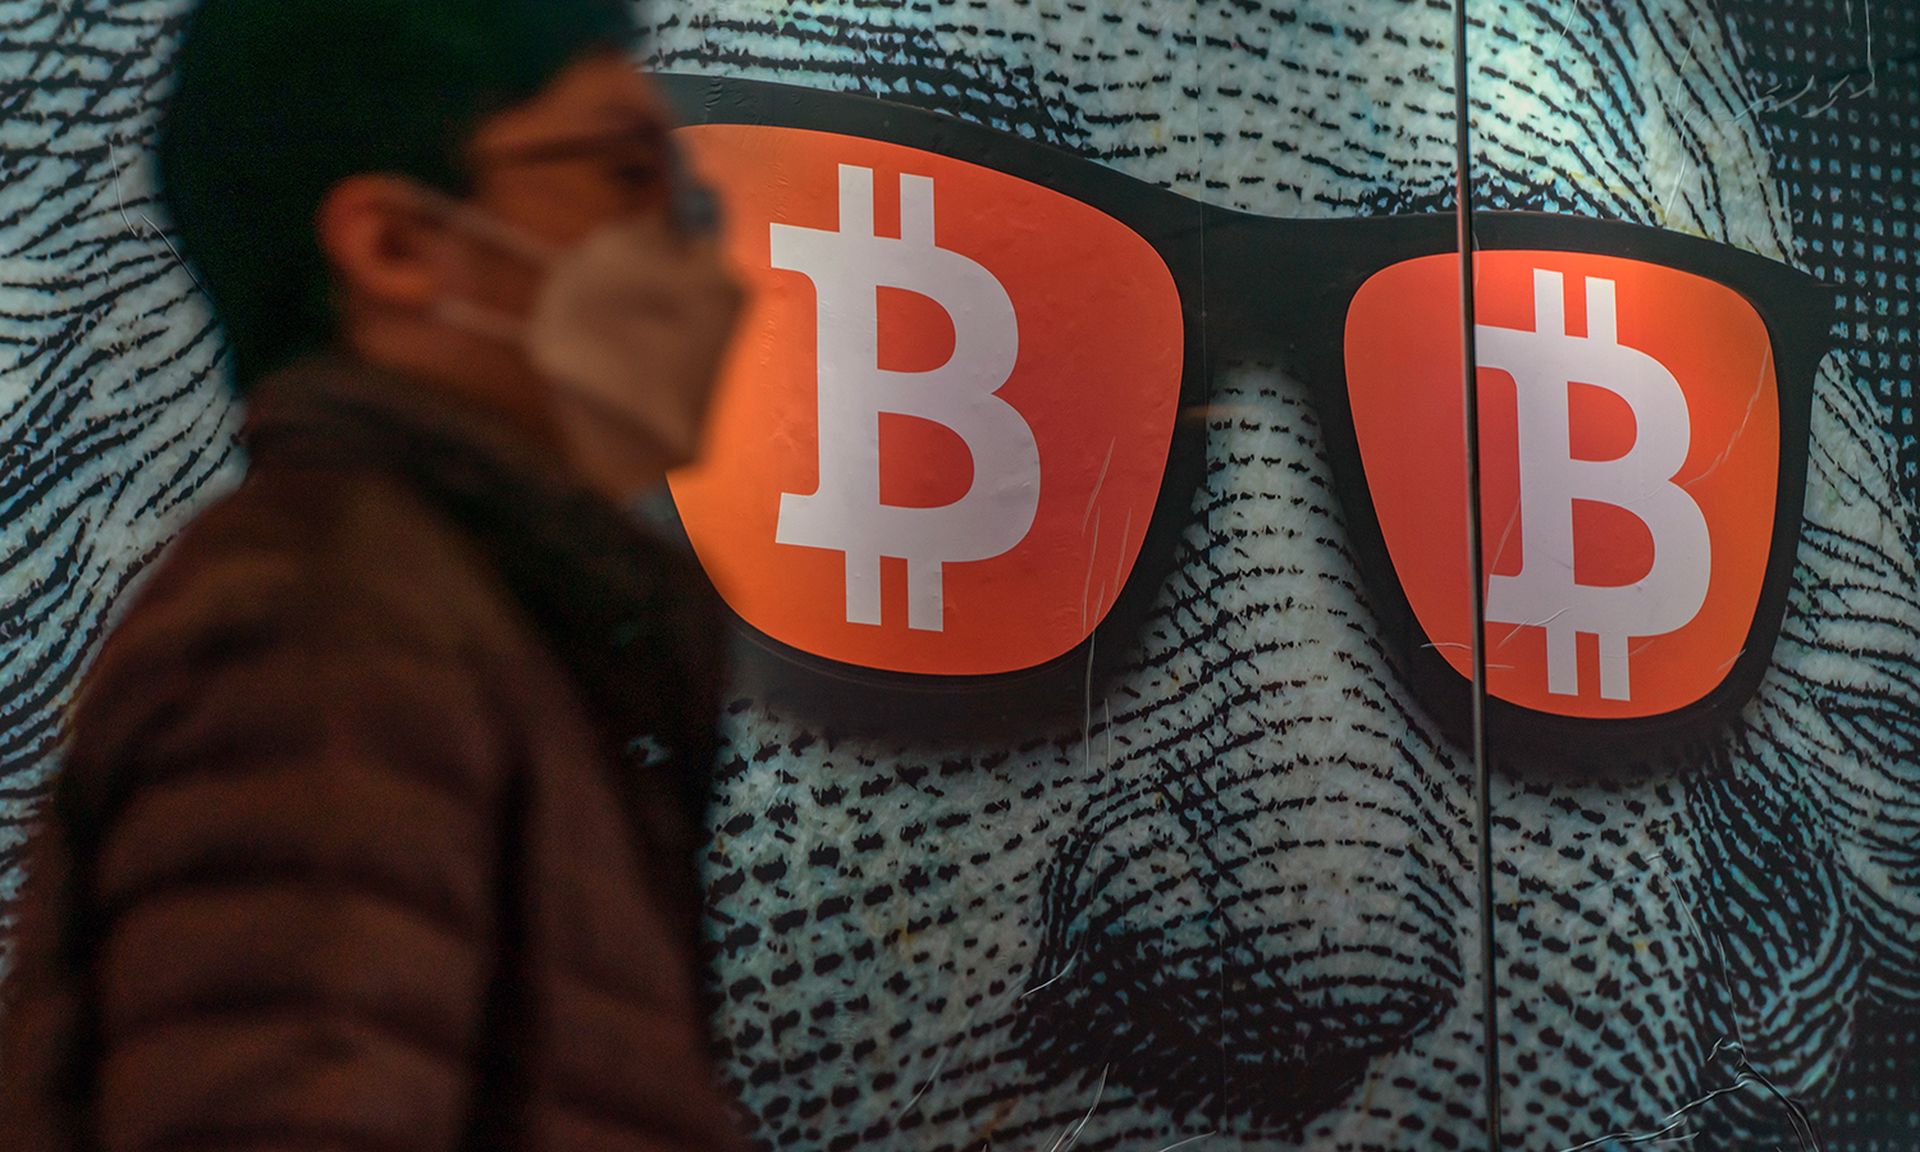 A pedestrian walks past a display of George Washington on the dollar bill wearing sunglasses with the Bitcoin logo in the lenses.